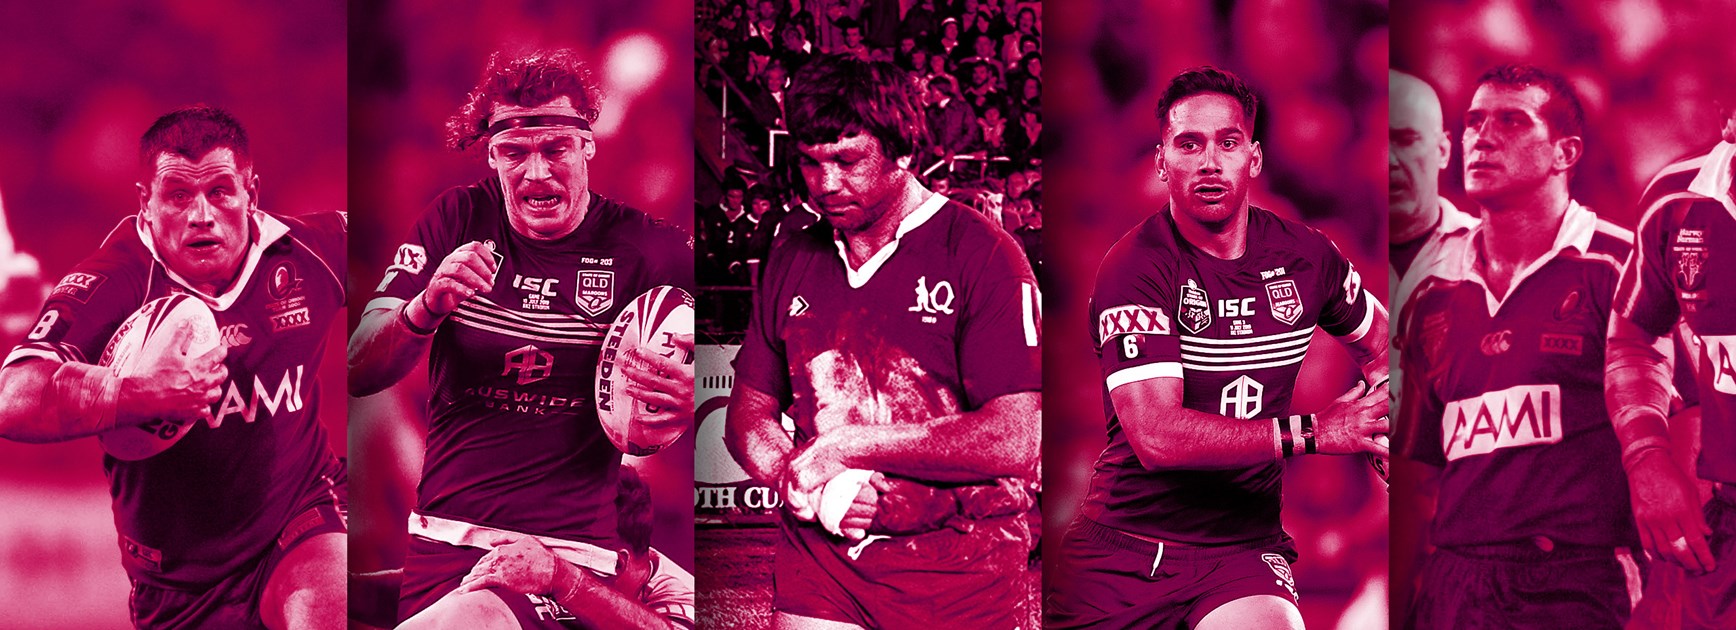 Arthur, the Rocket and Sattler among Queensland Maroons' one-game wonders